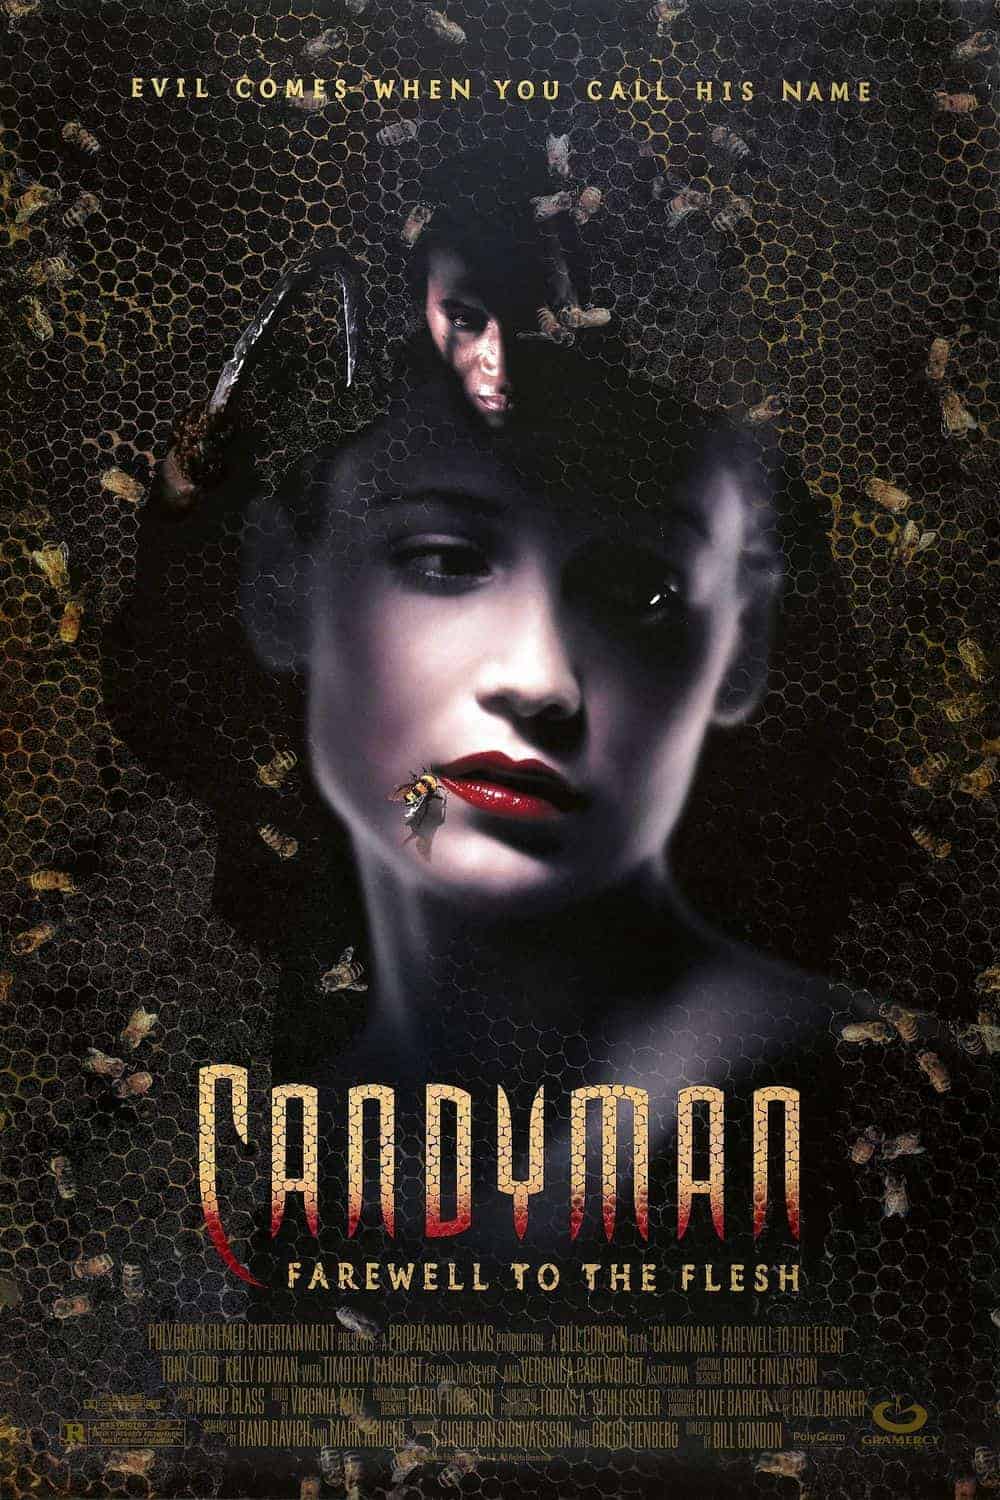 Candyman (1992) Best Chicago Movies to Add in Your Watchlist